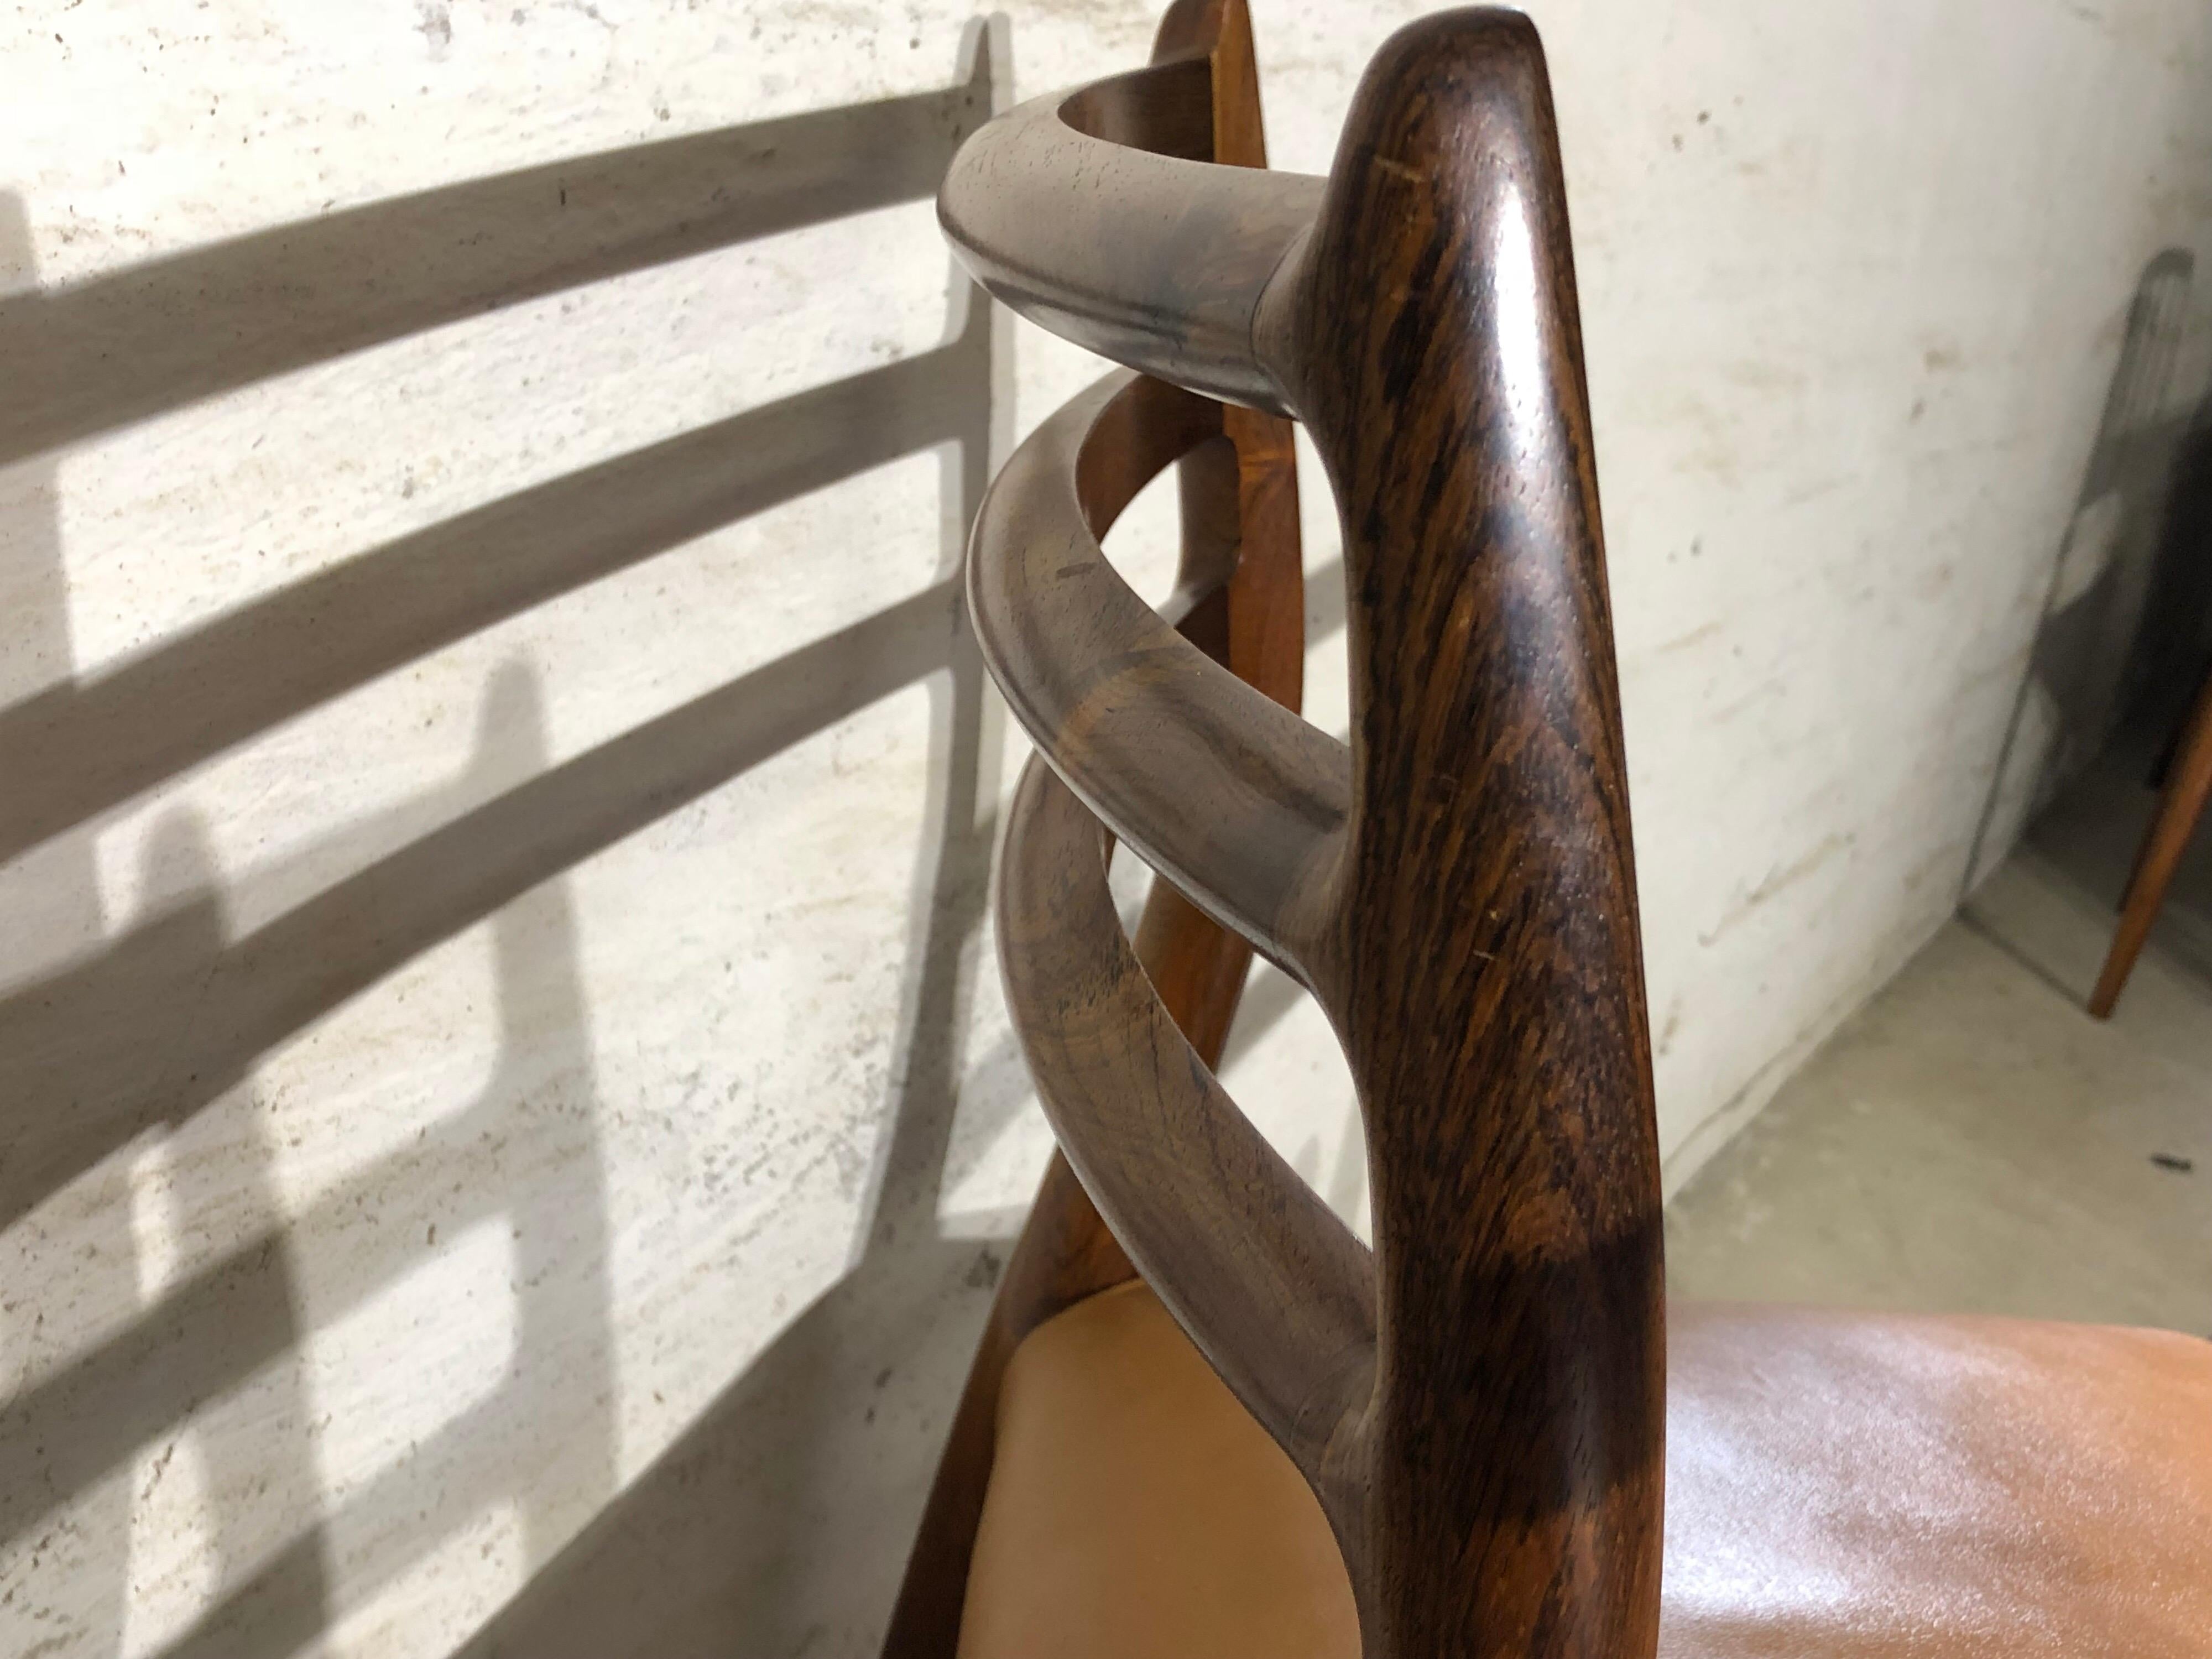 Niels O. Møller No. 78, Set of 4 Rosewood Chairs Danish Midcentury In Good Condition In Odense, DK